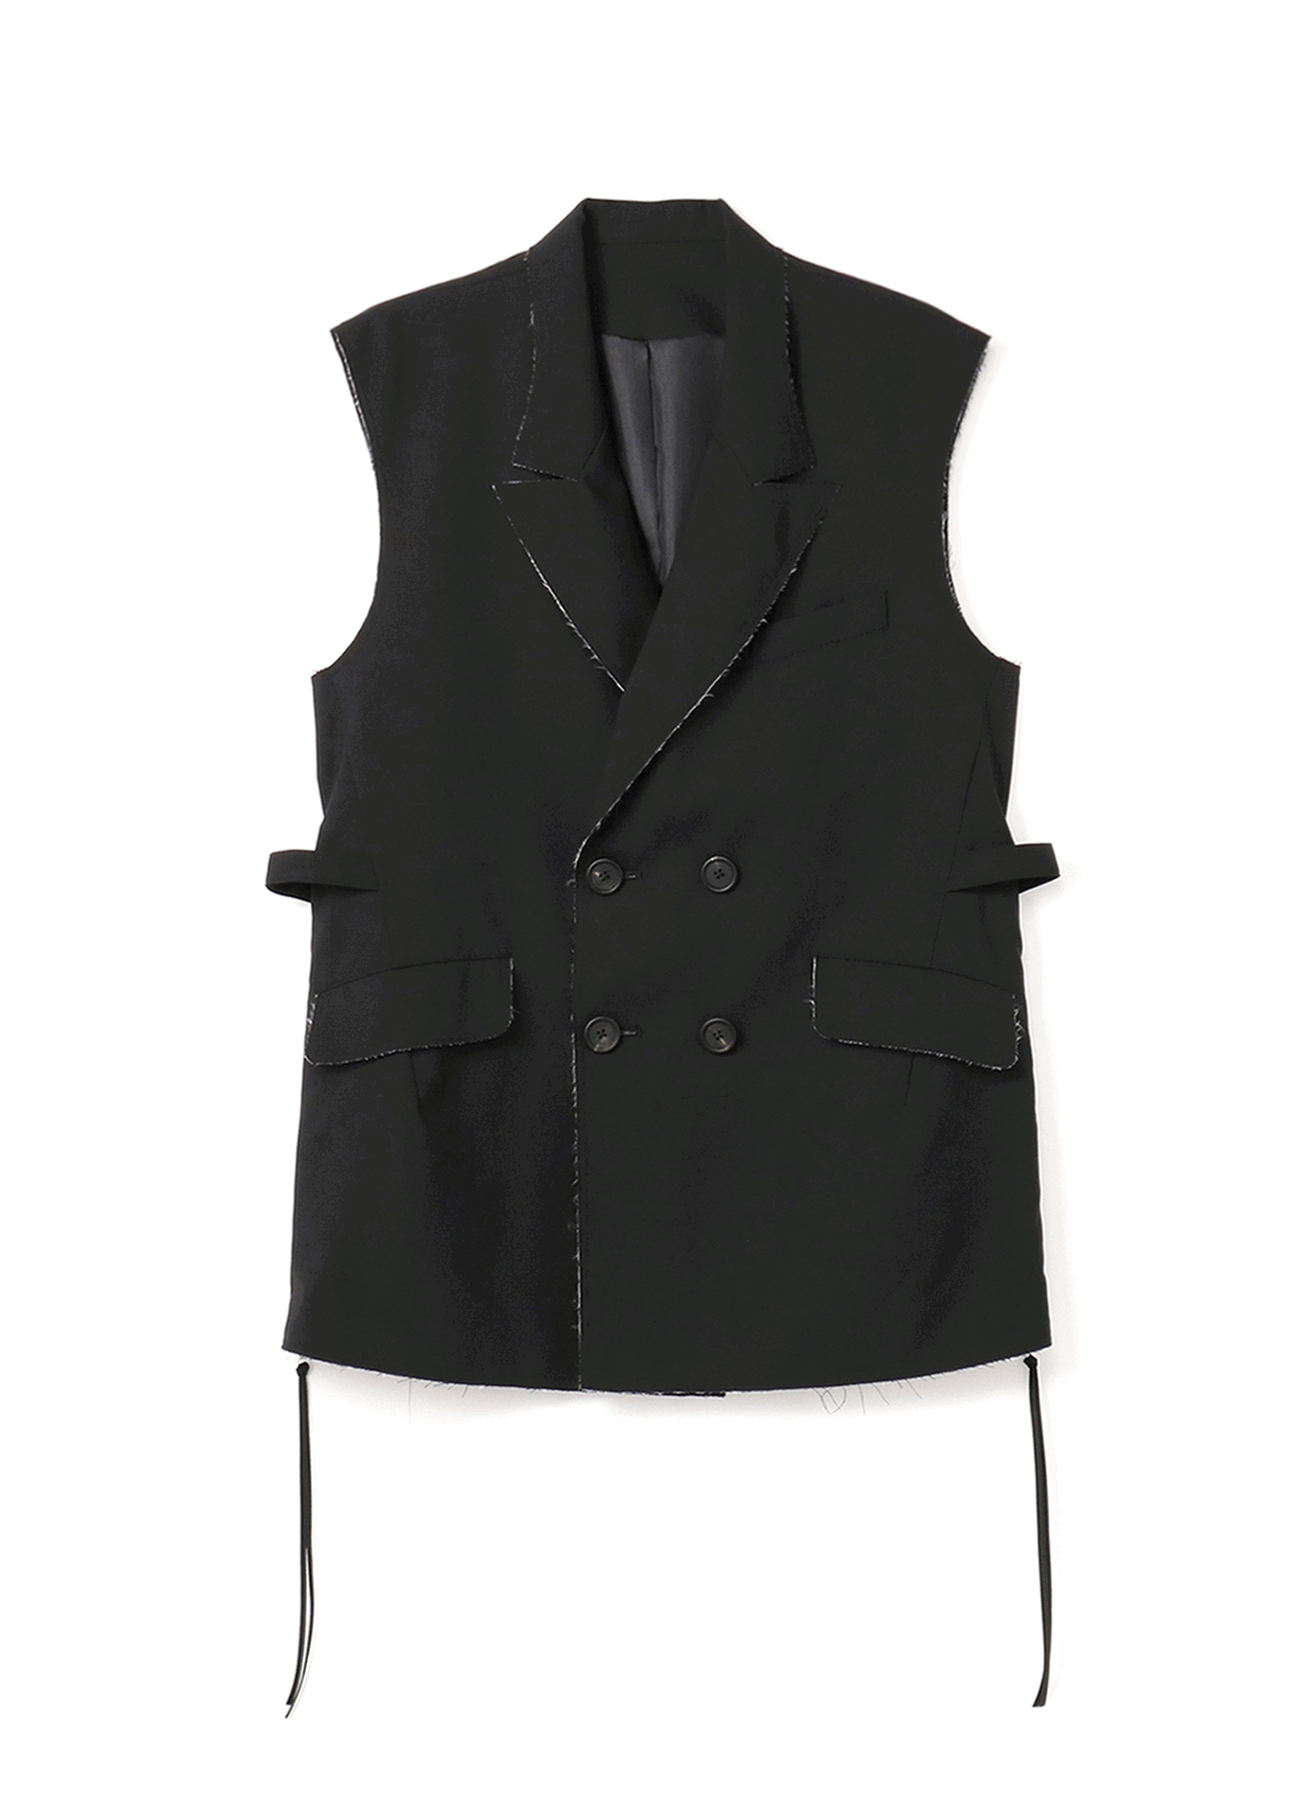 T/W Tropical Double Breasted Big Silhouette 4BW Sleeveless Jacket